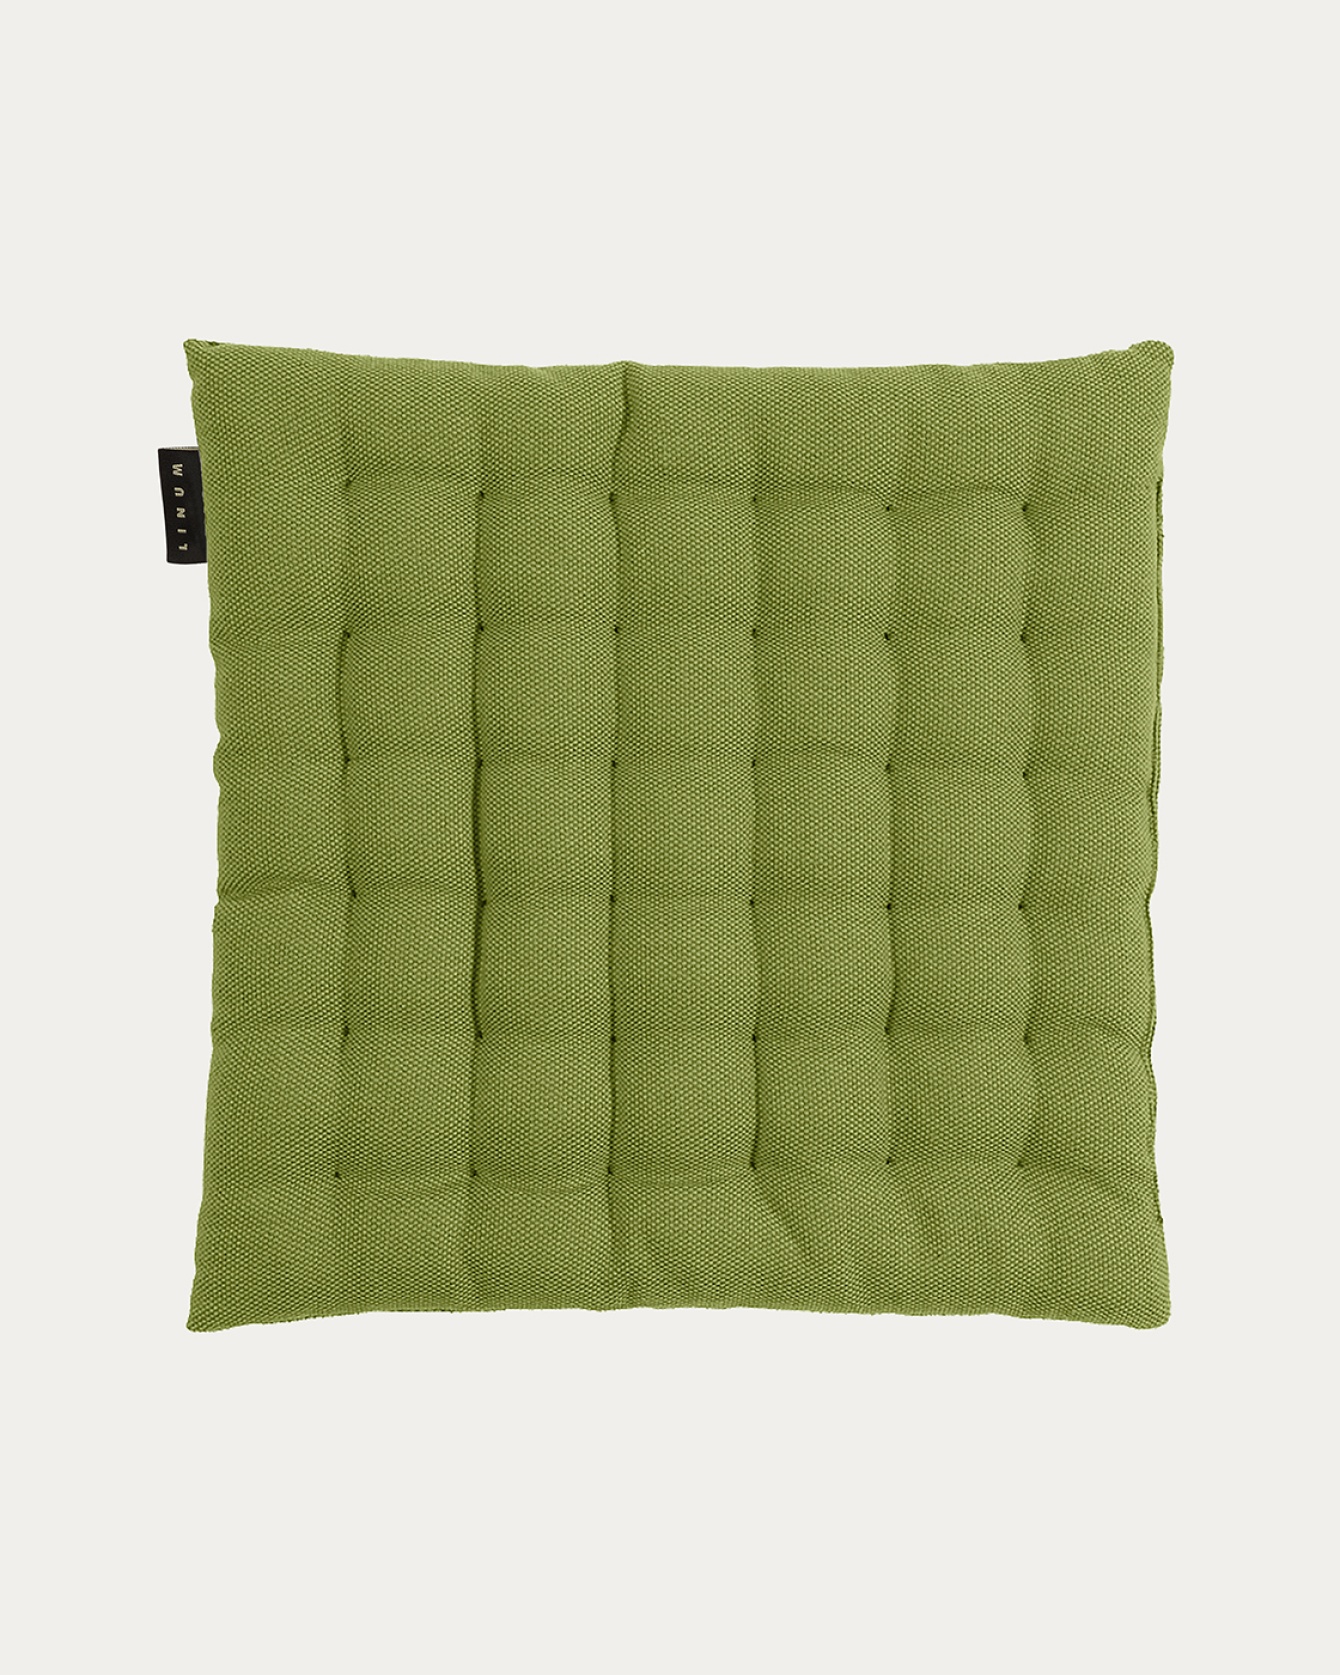 Product image moss green PEPPER seat cushion made of soft cotton with recycled polyester filling from LINUM DESIGN. Size 40x40 cm.